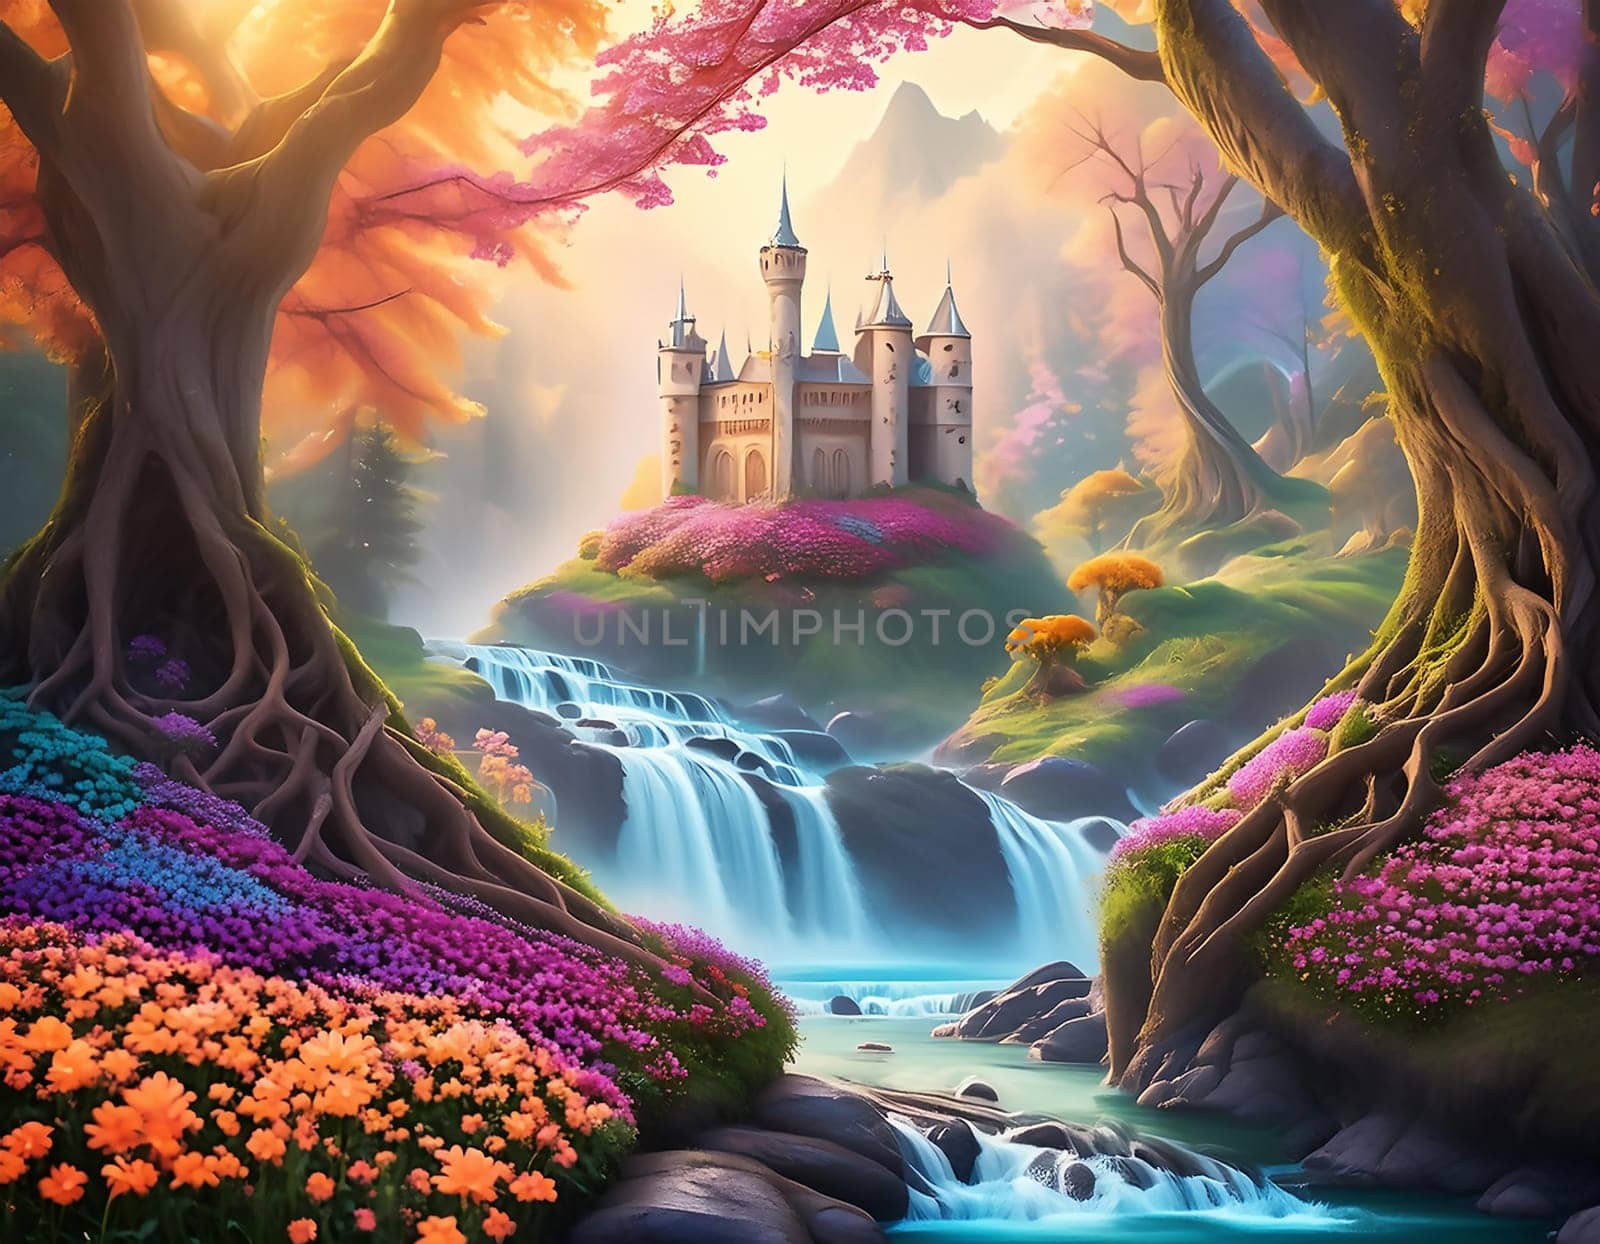 Surreal misty image of magical forest with trees, realistic flowers, castle on distant cliff and fantasy world.